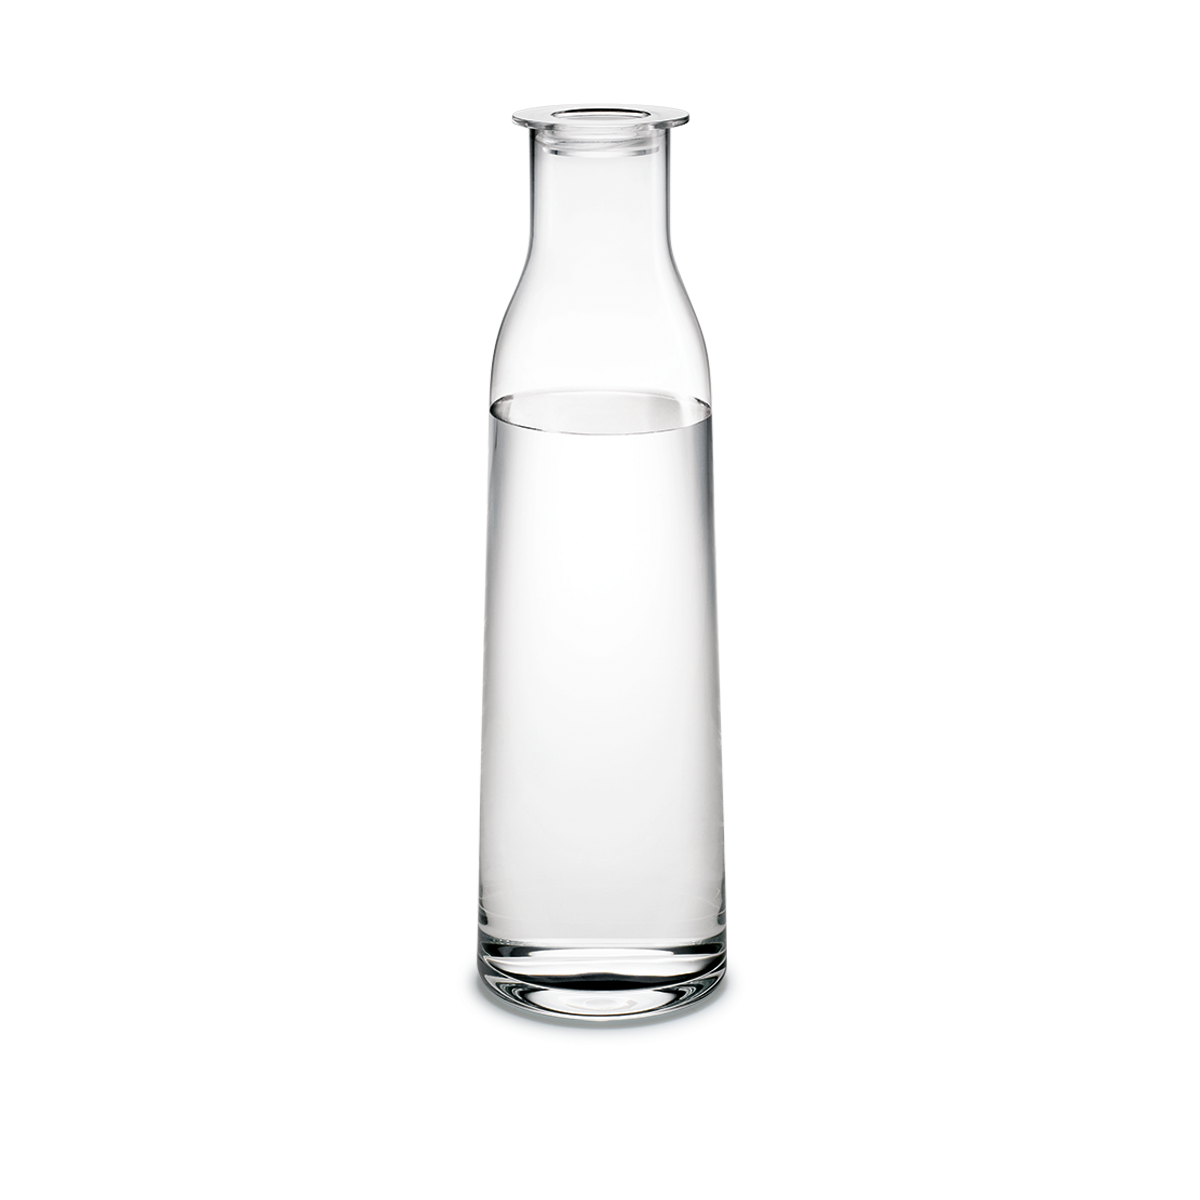 Minima Bottle and Lid by Holmegaard